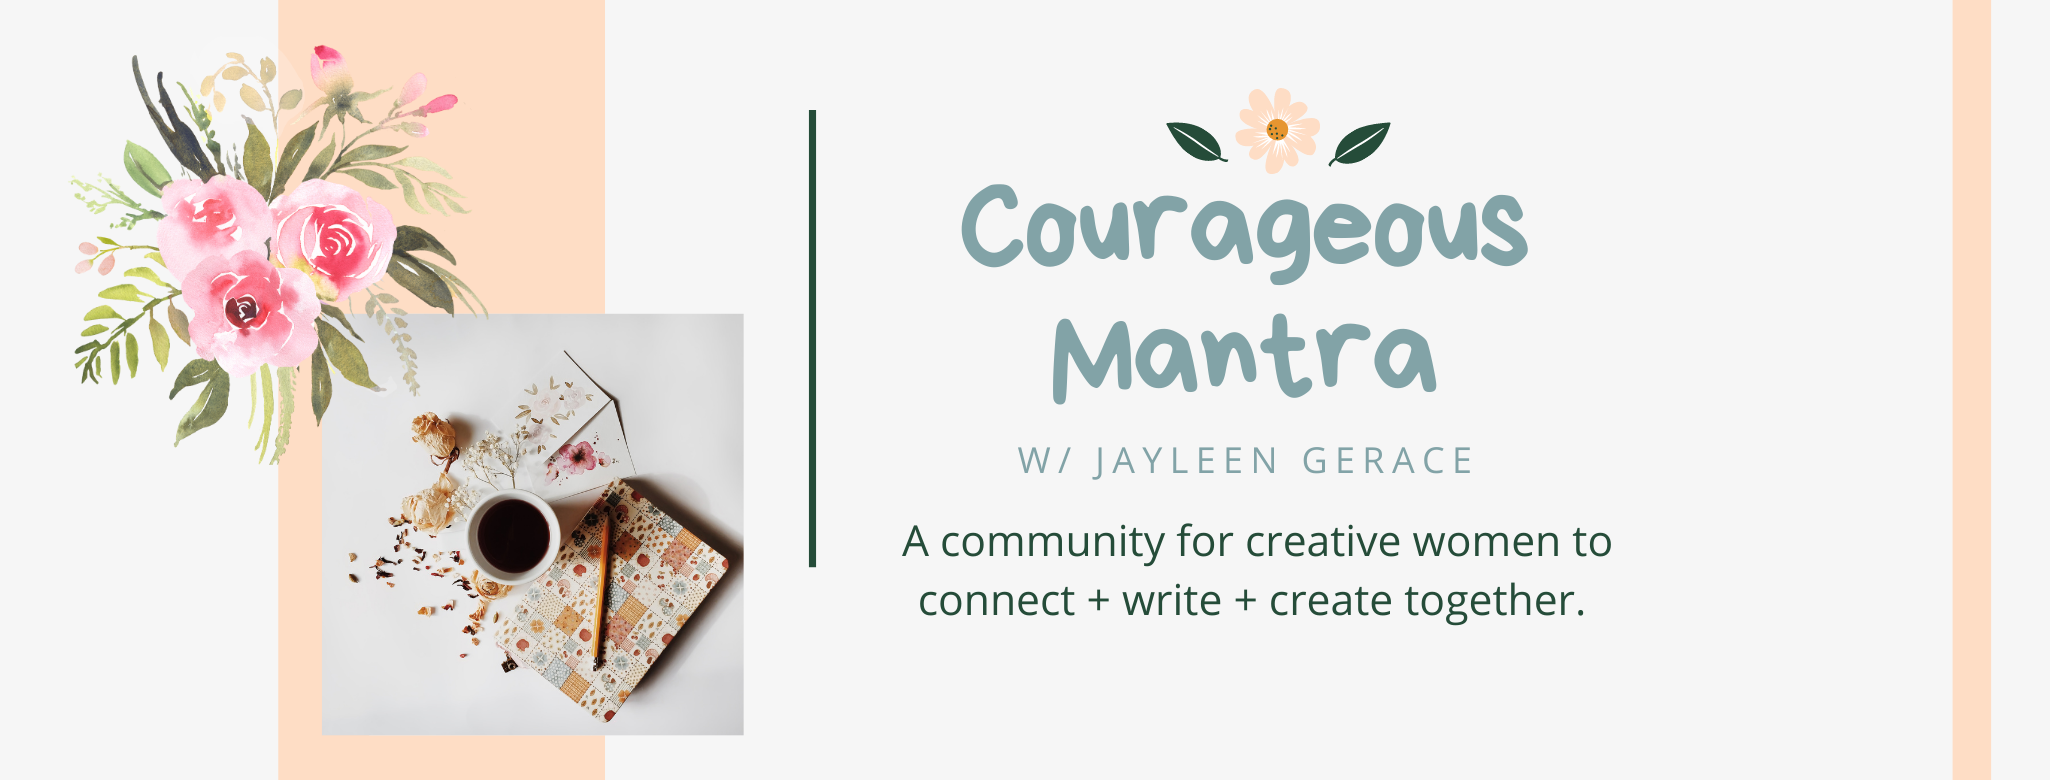 Courageous Mantra w/ Jayleen: A community for creative women to connect + write + create.